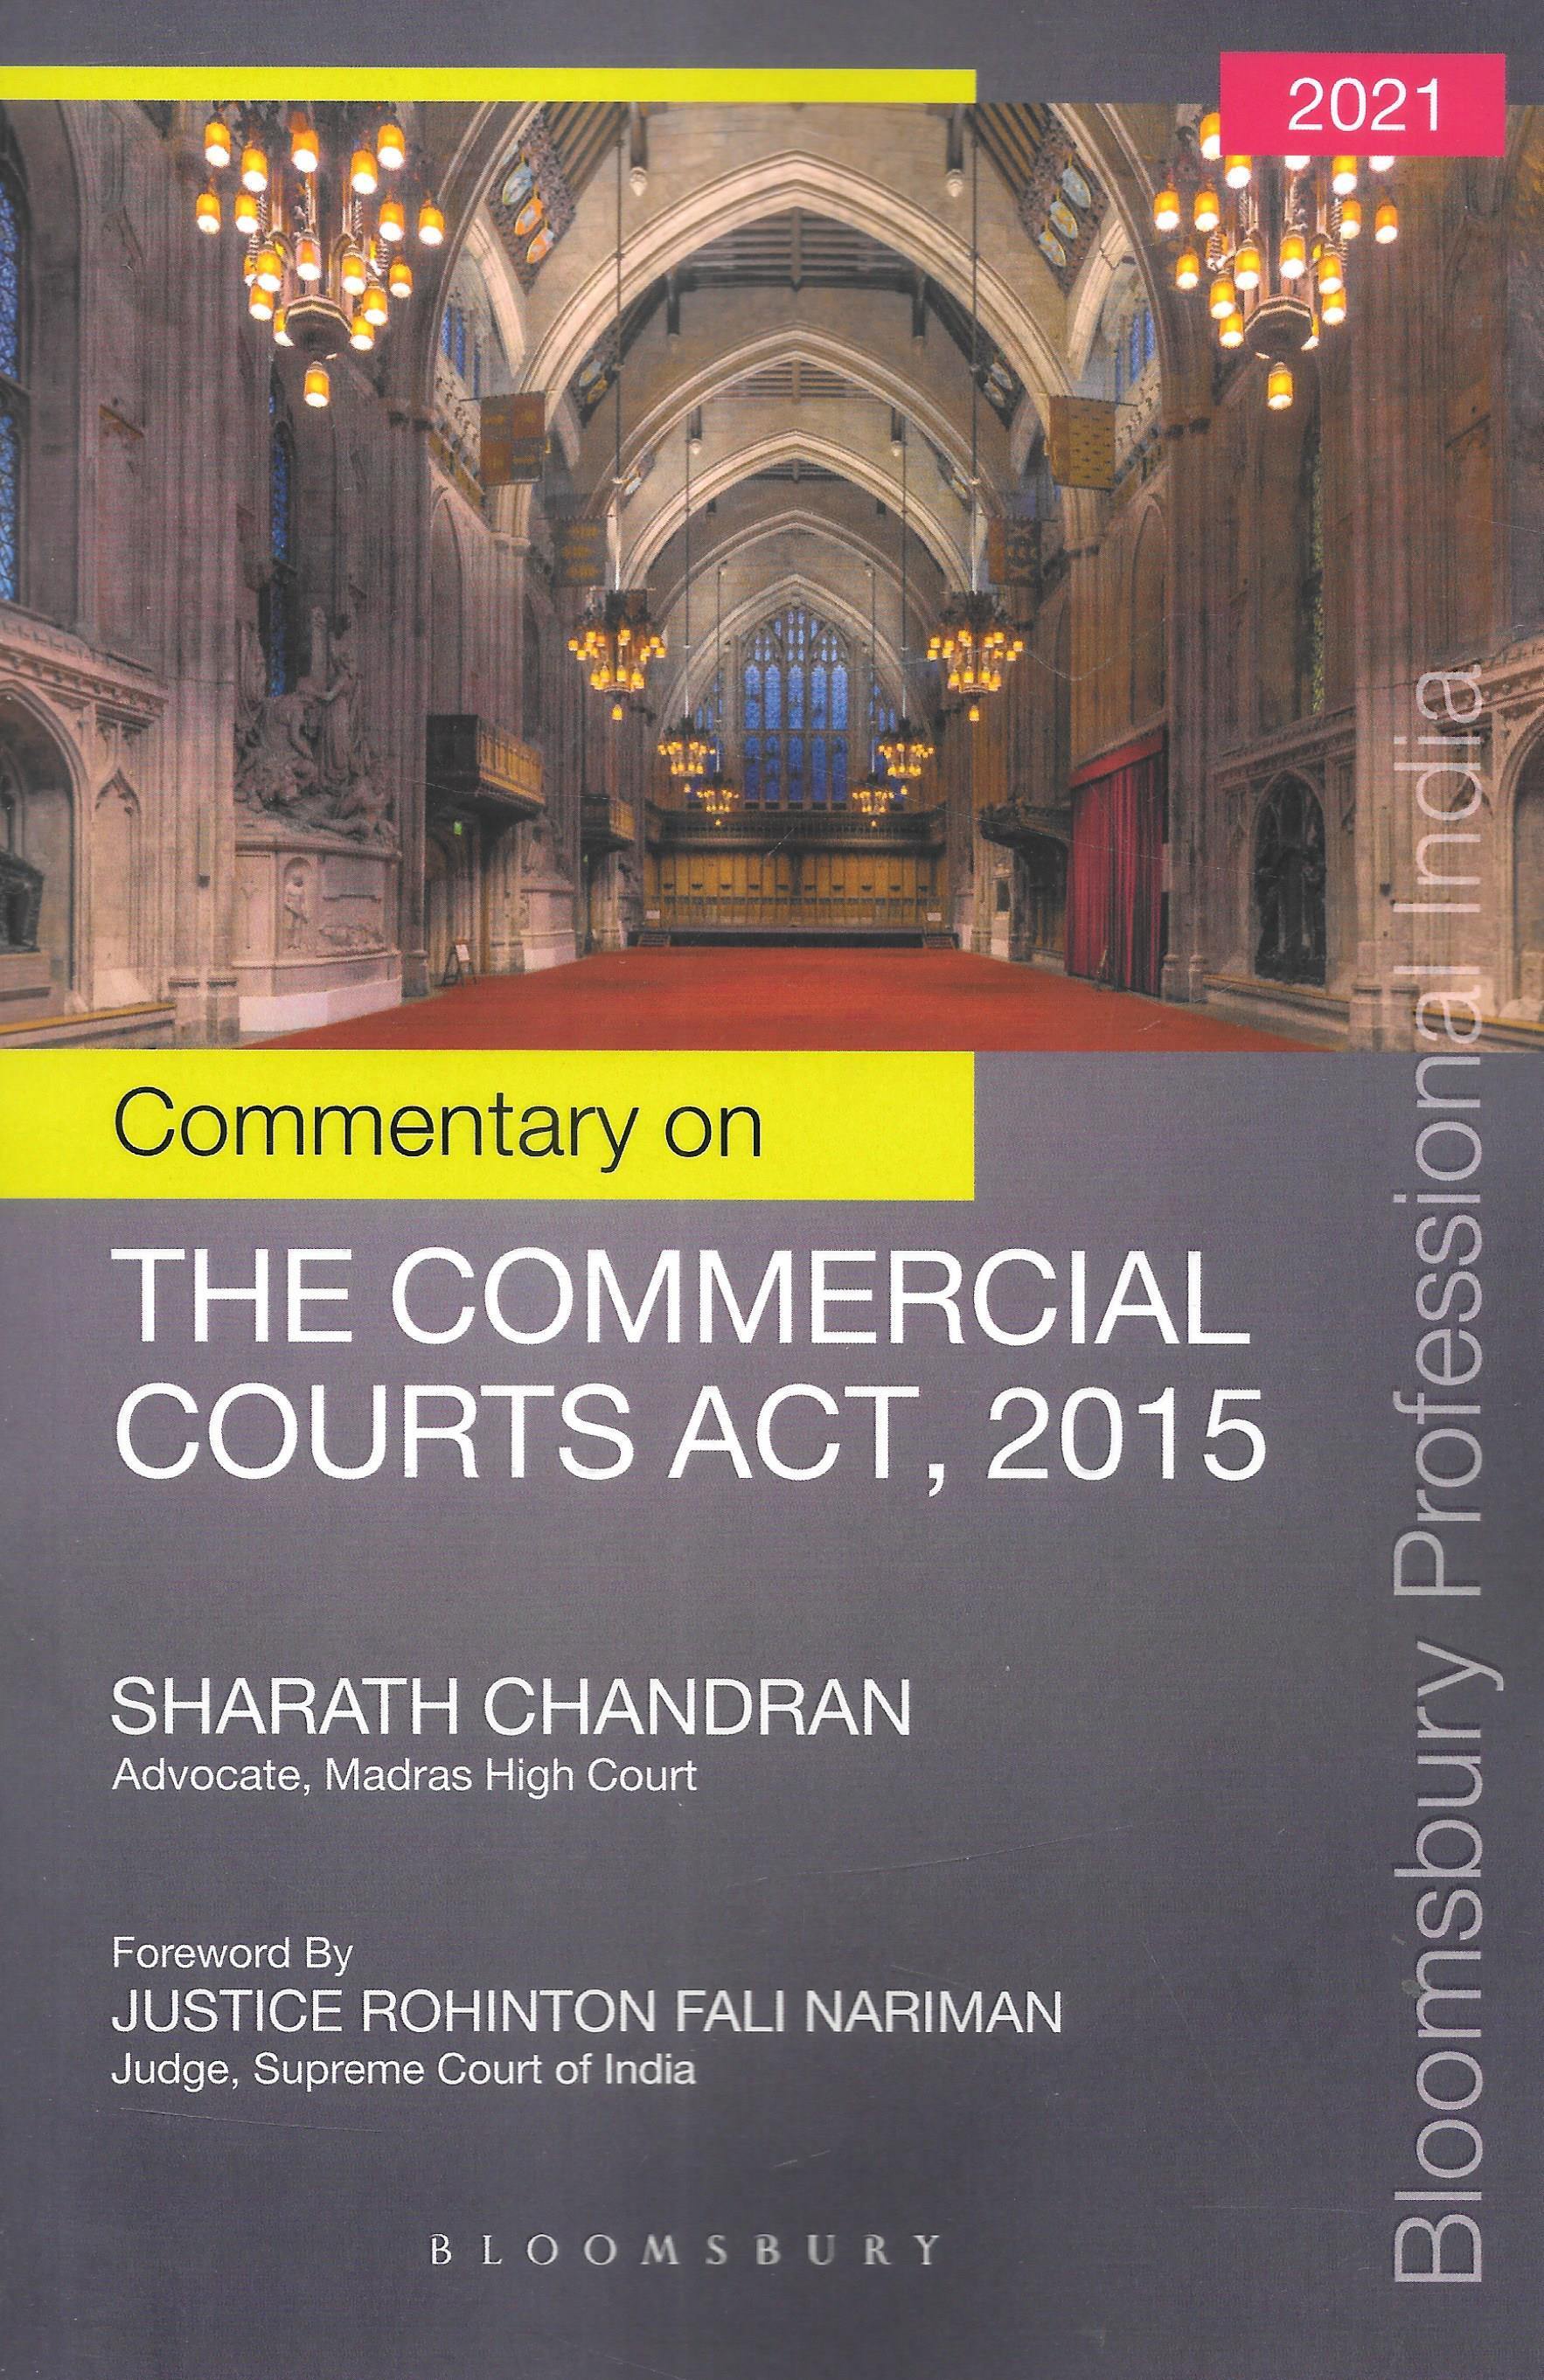 Commentary on THE COMMERCIAL COURTS ACT, 2015 - M&J Services